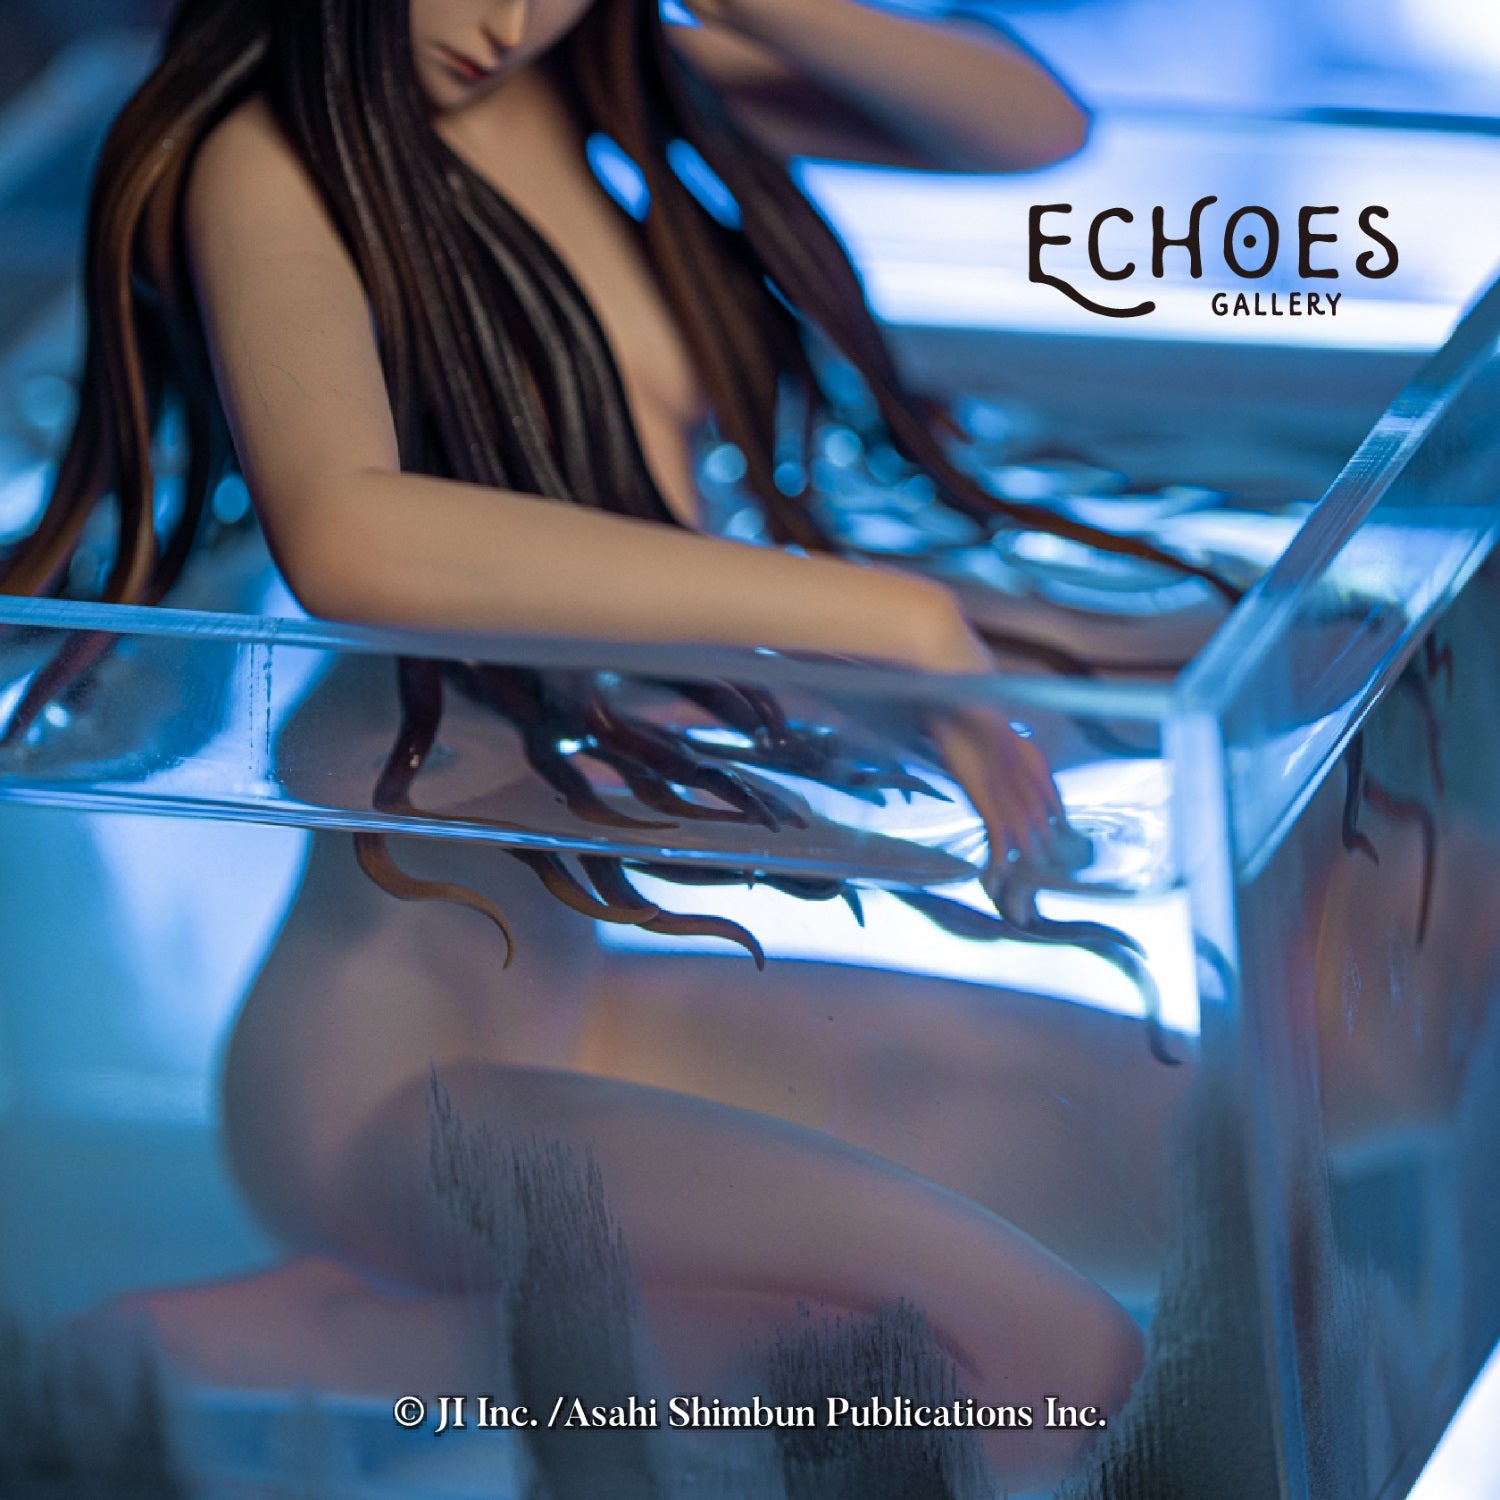 PRE-ORDER Echoes Gallery - Itou Junji: Collection - Kawakami Tomie